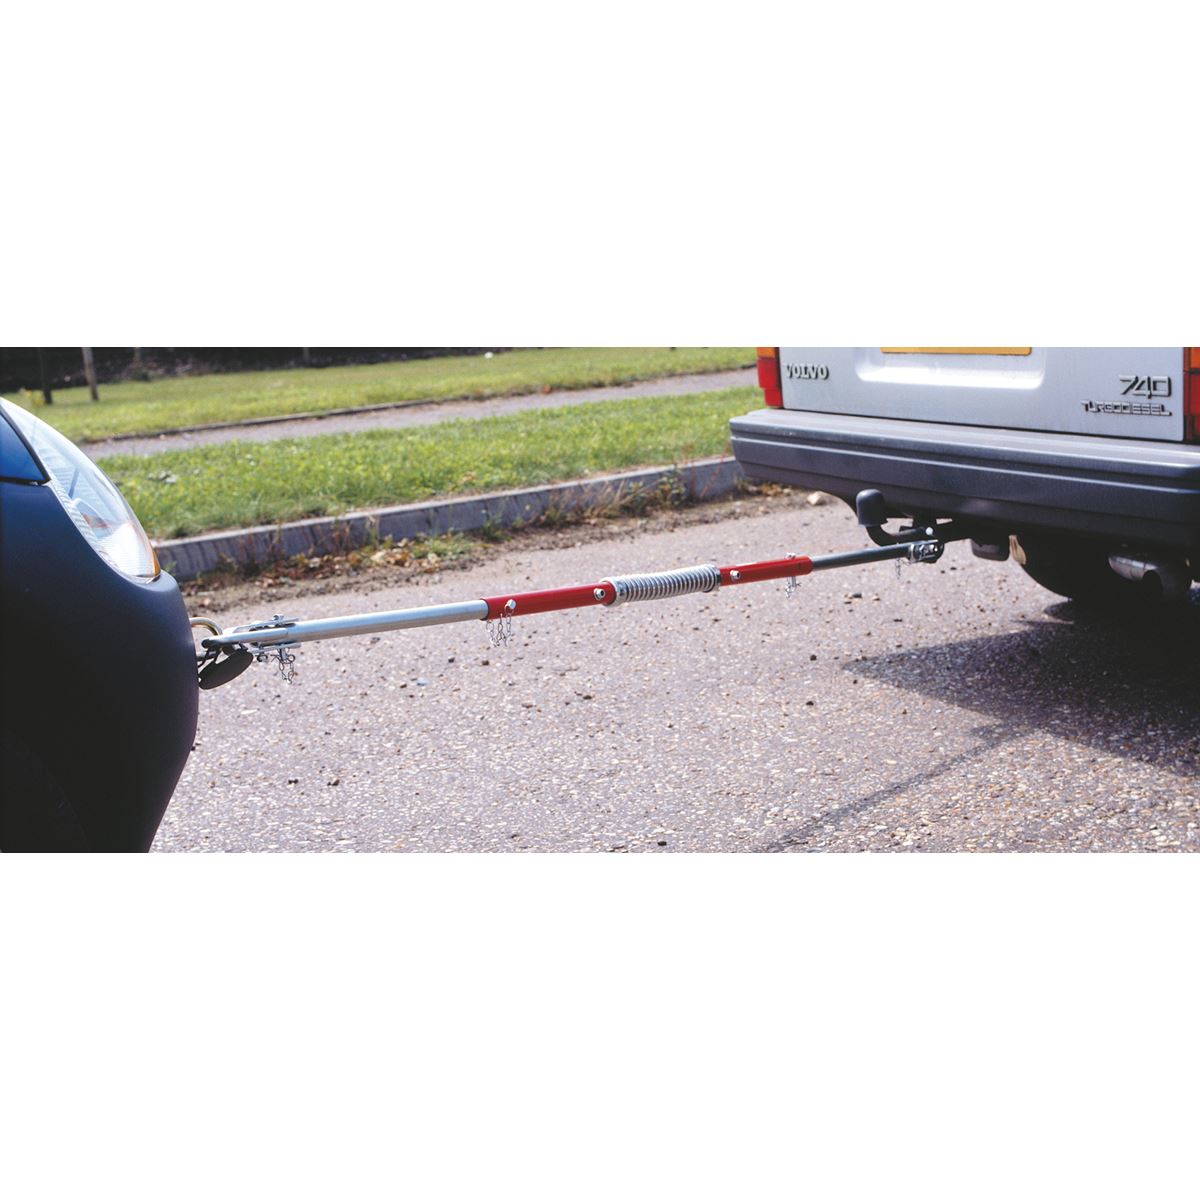 Sealey Tow Pole 2000kg Rolling Load Capacity with Shock Spring